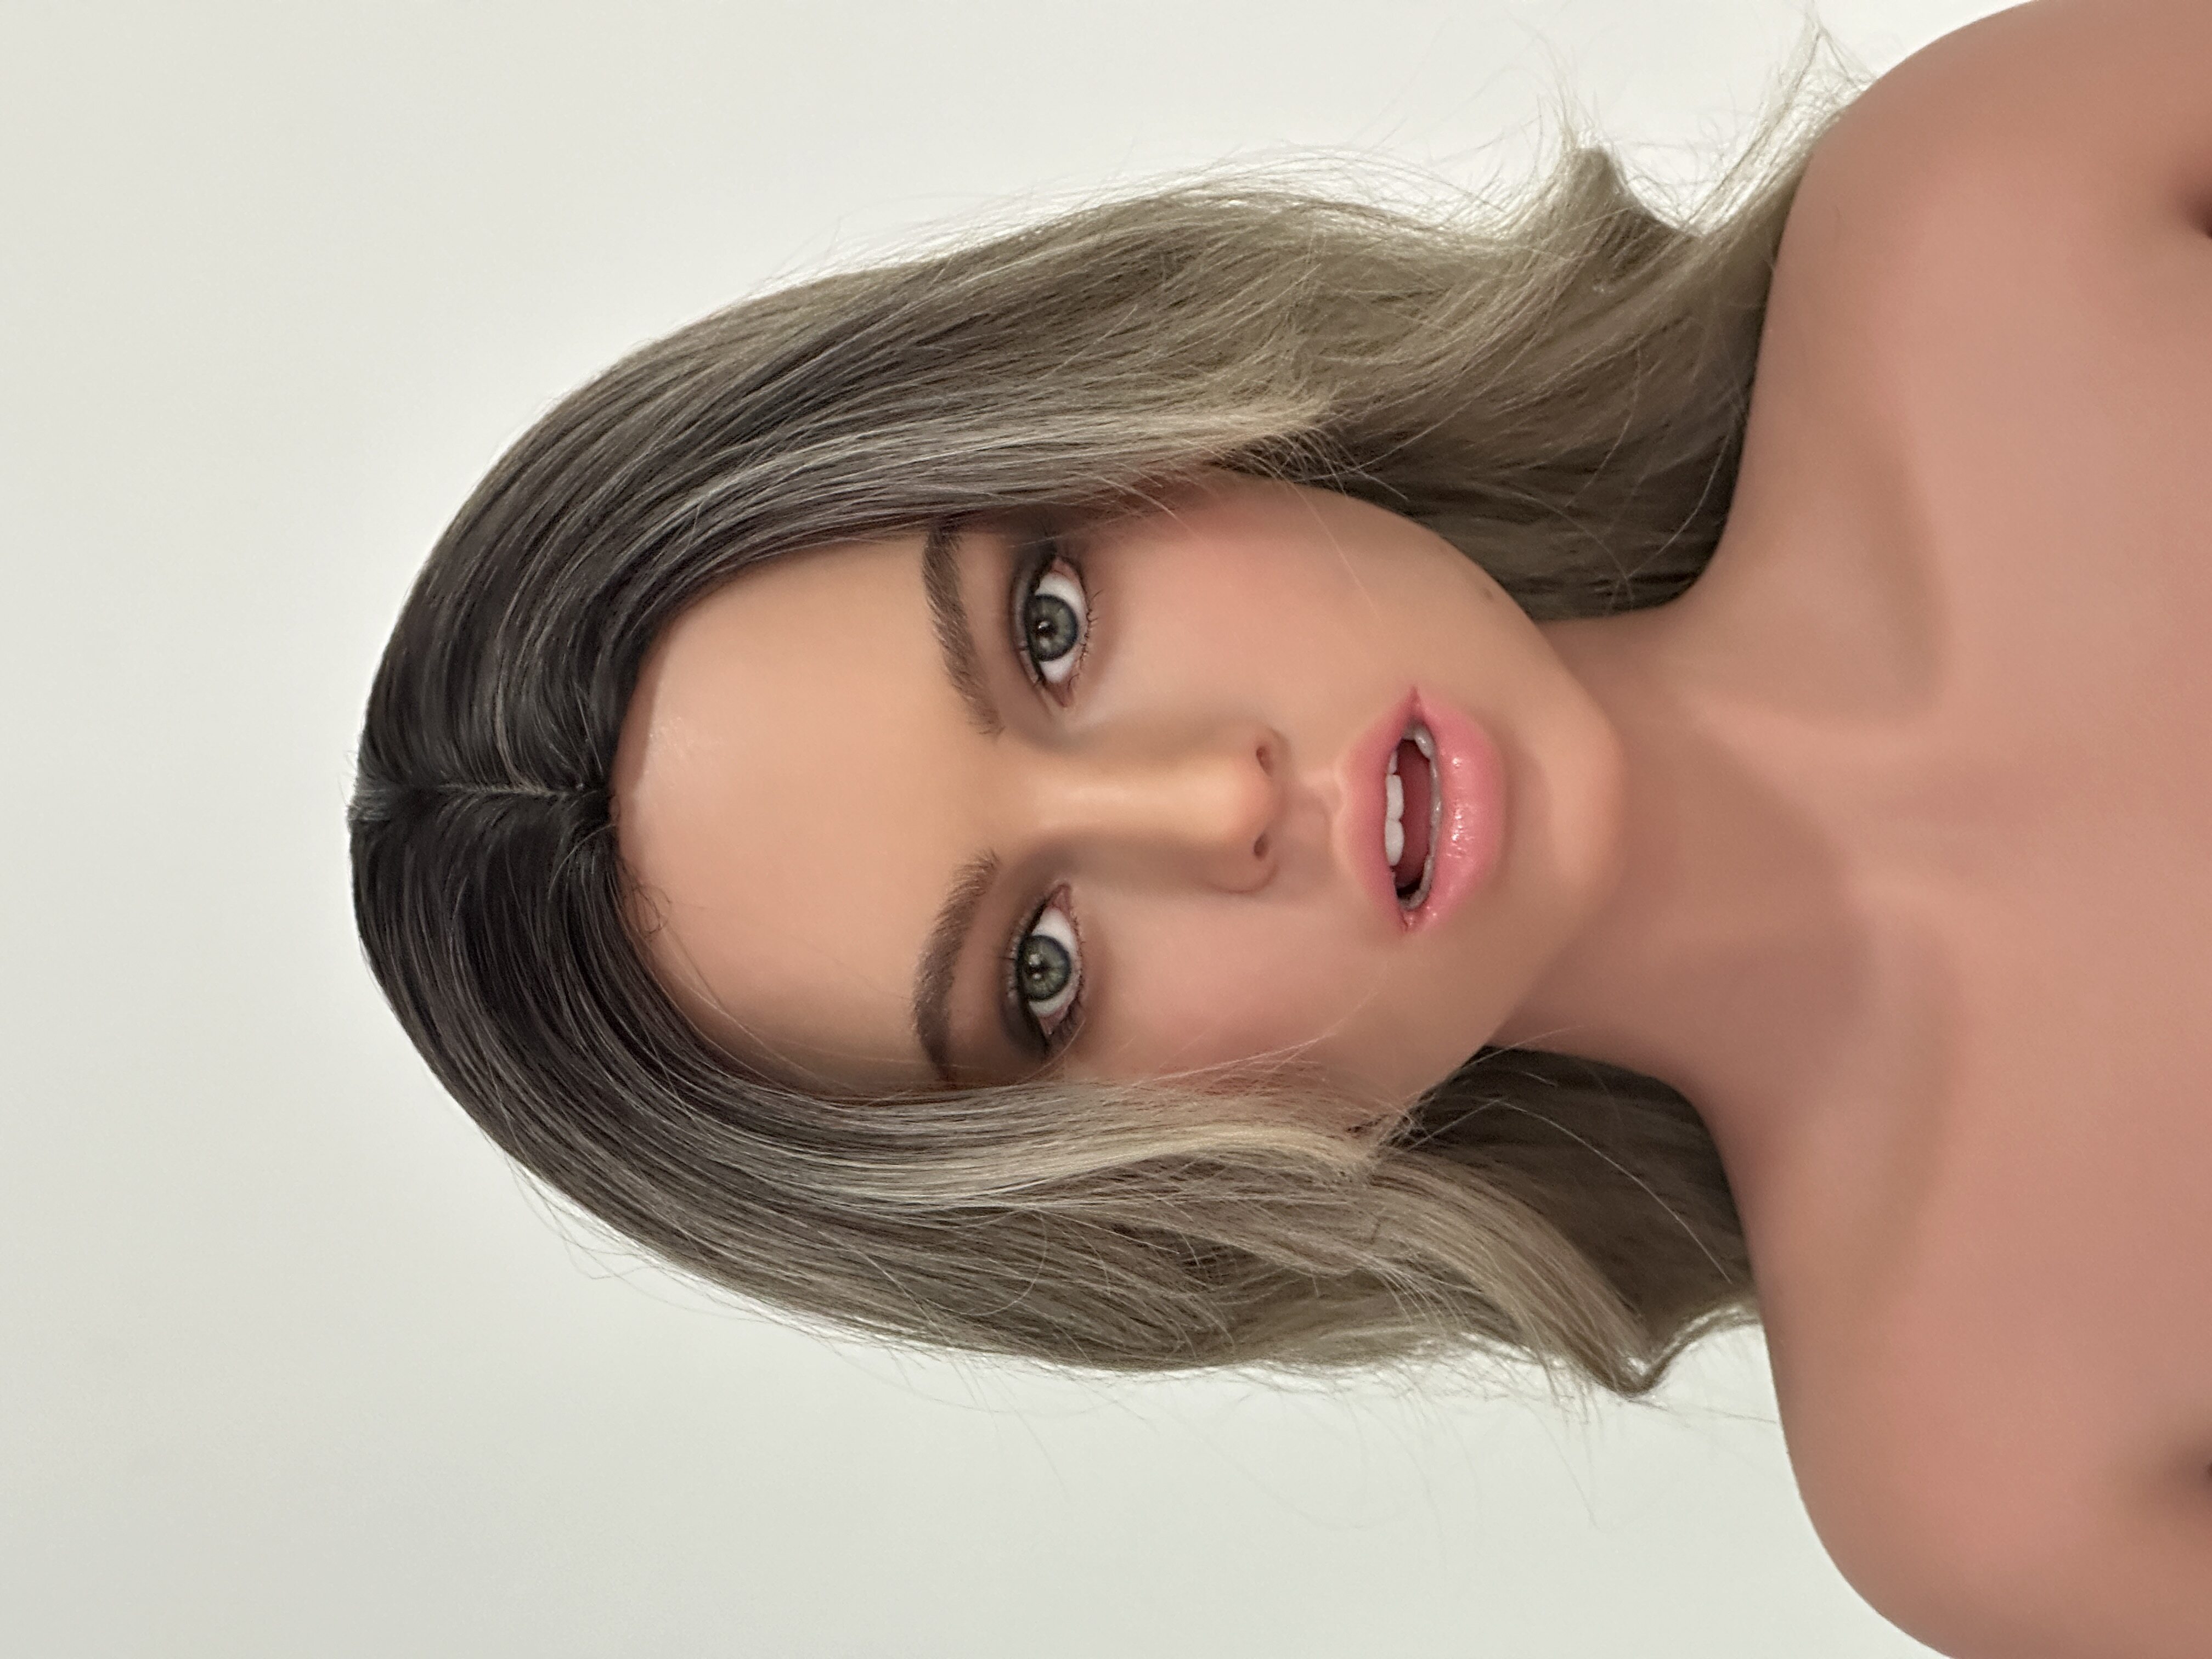 Mahogany - 163cm E-Cup Full Silicone Head Zelex SLE Doll (US In Stock) image4